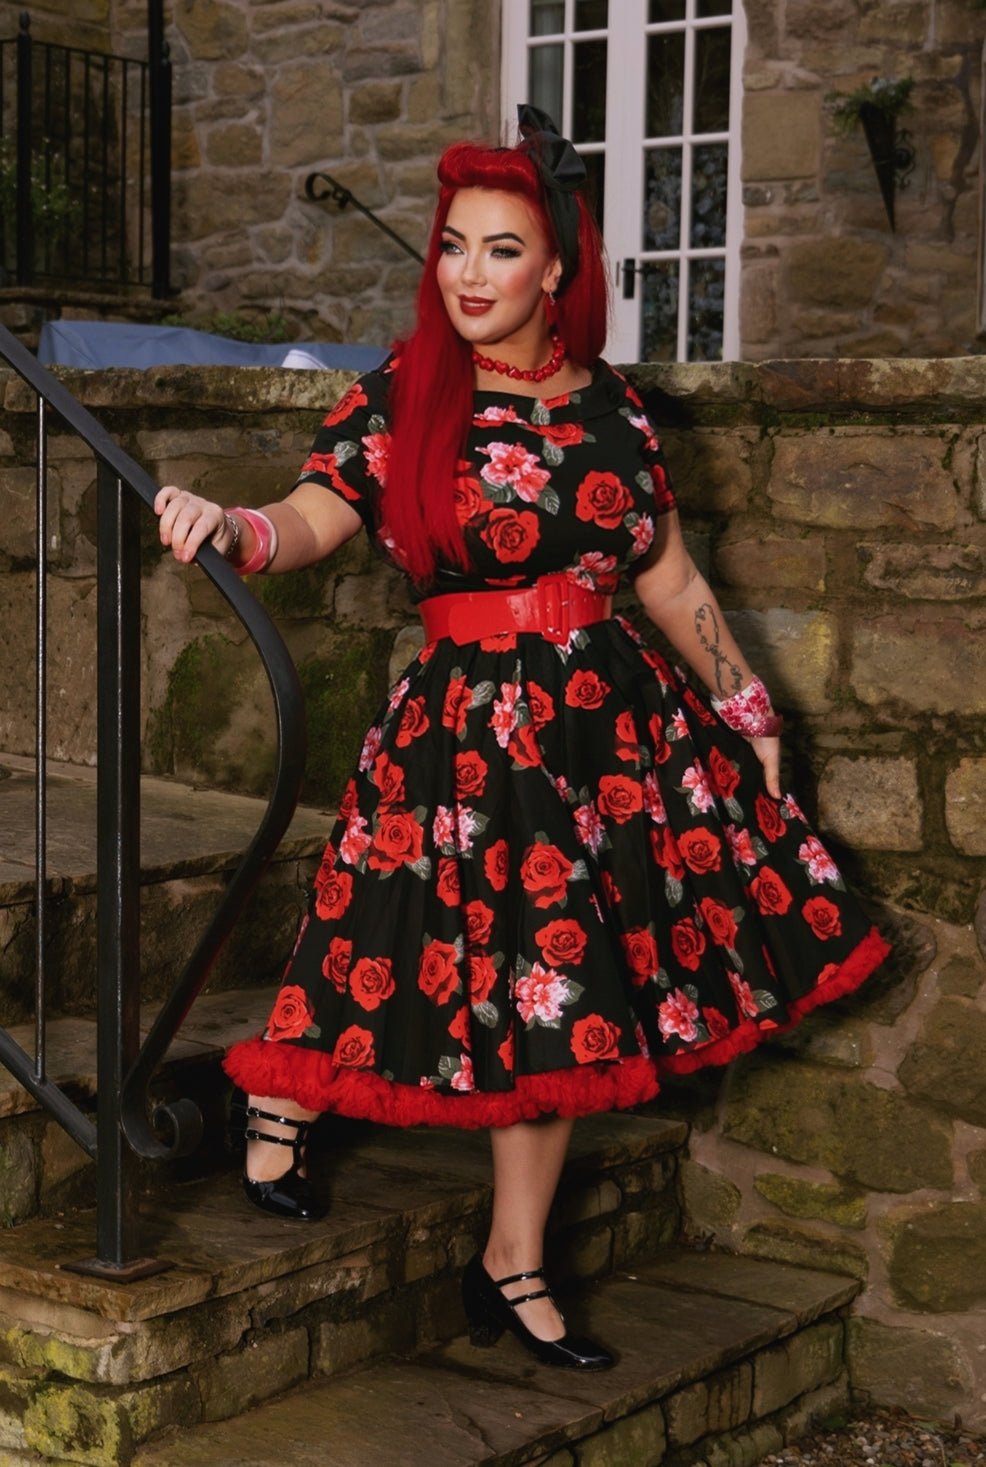 Woman wears our short sleeved swing dress, in black/red roses print, with red accessories, on steps